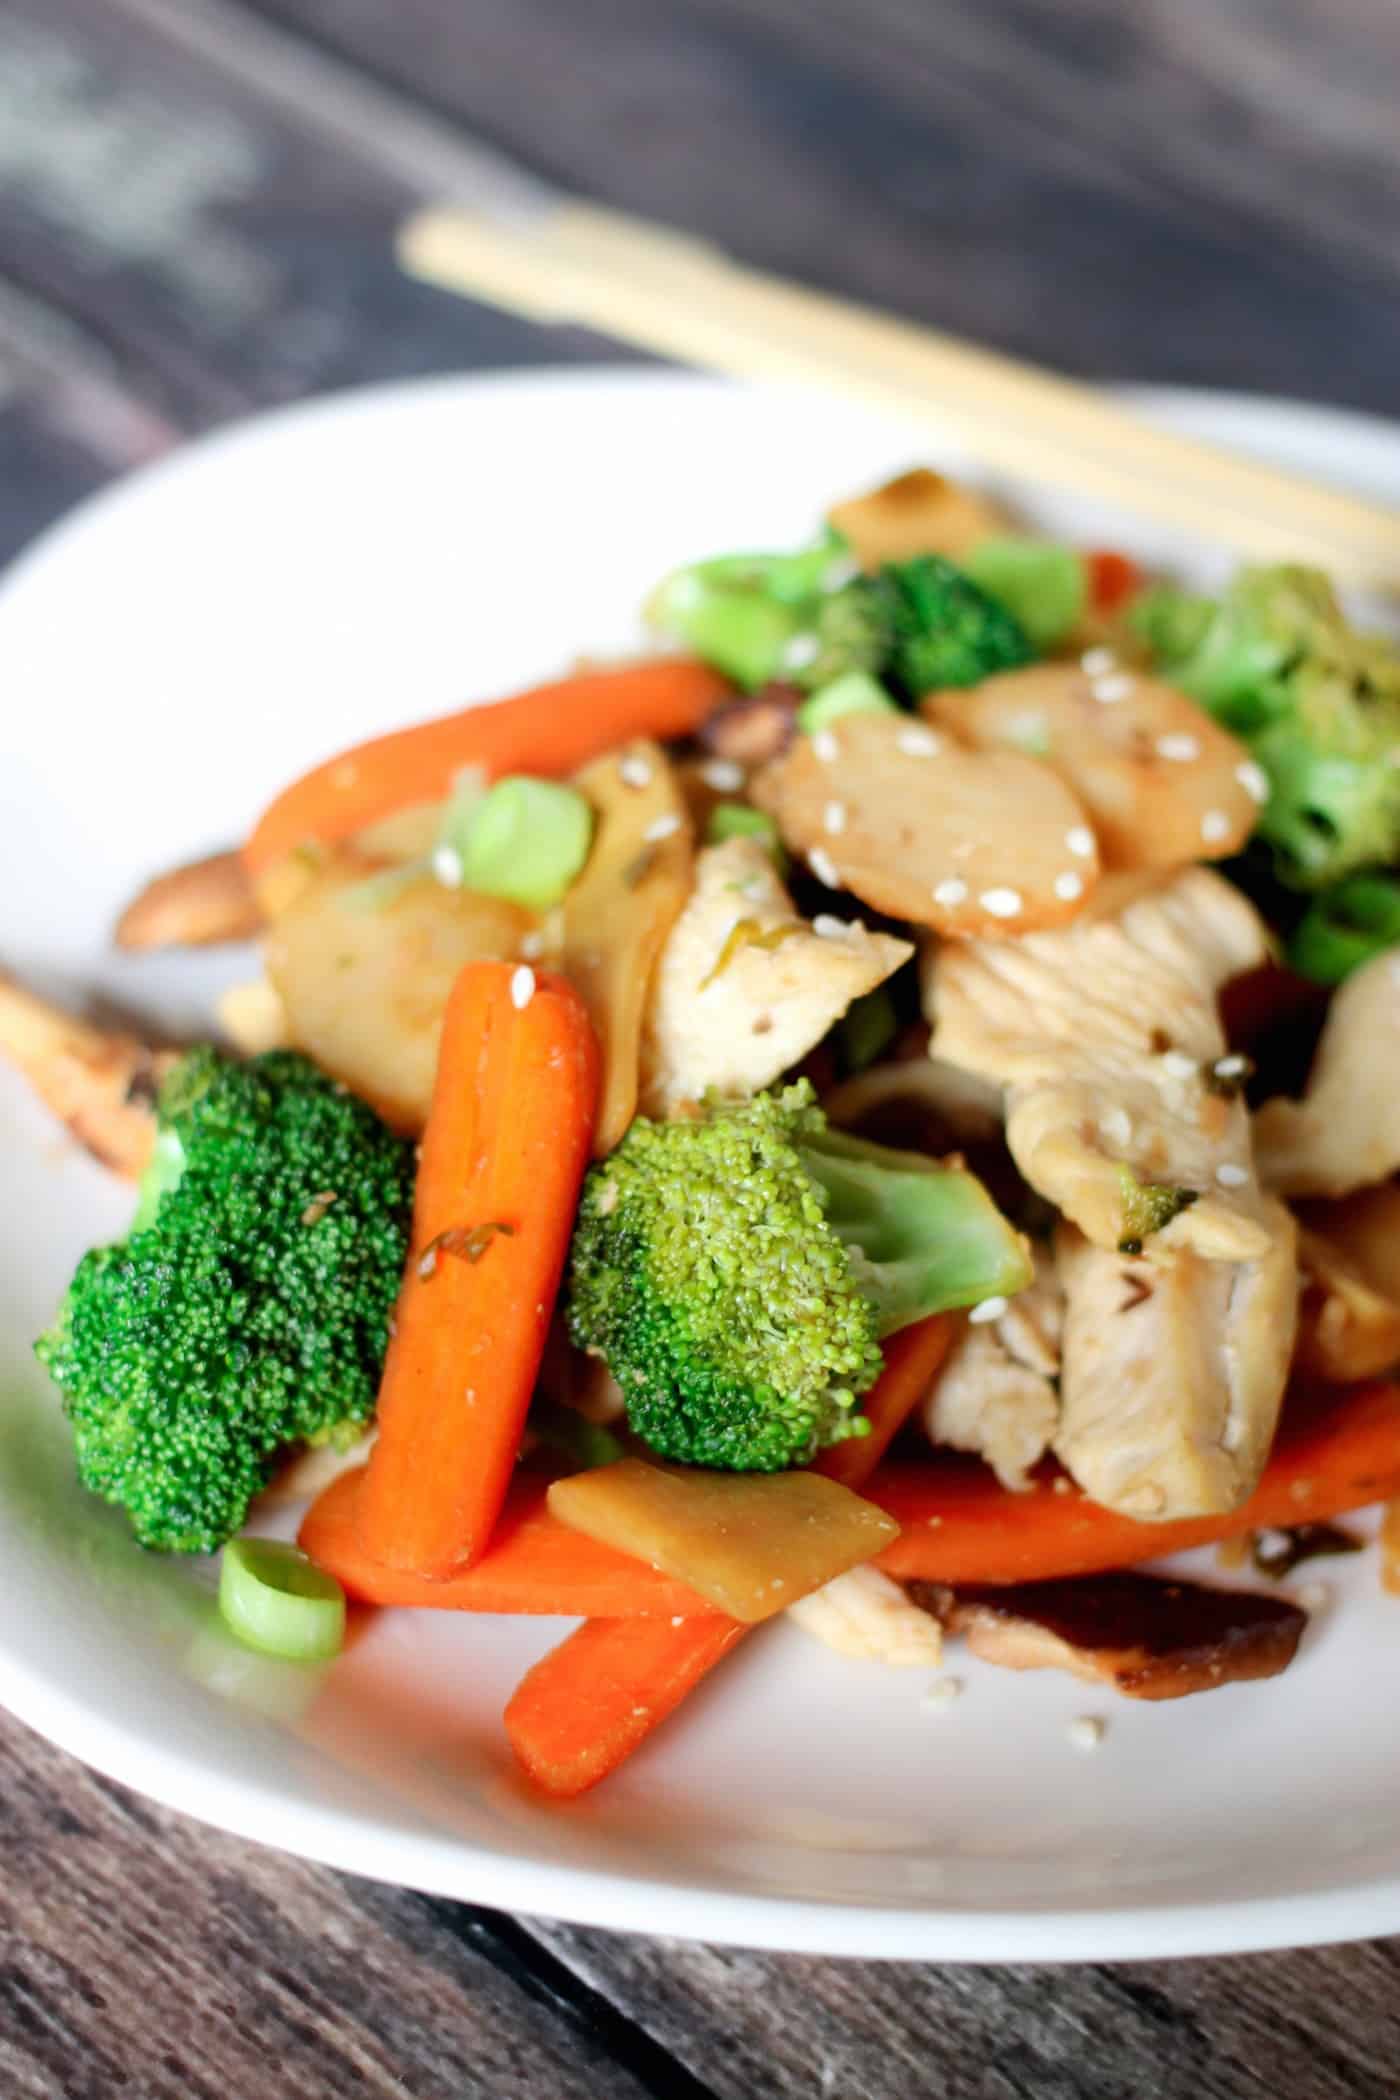 Healthy stir fry recipe with chicken and vegetables